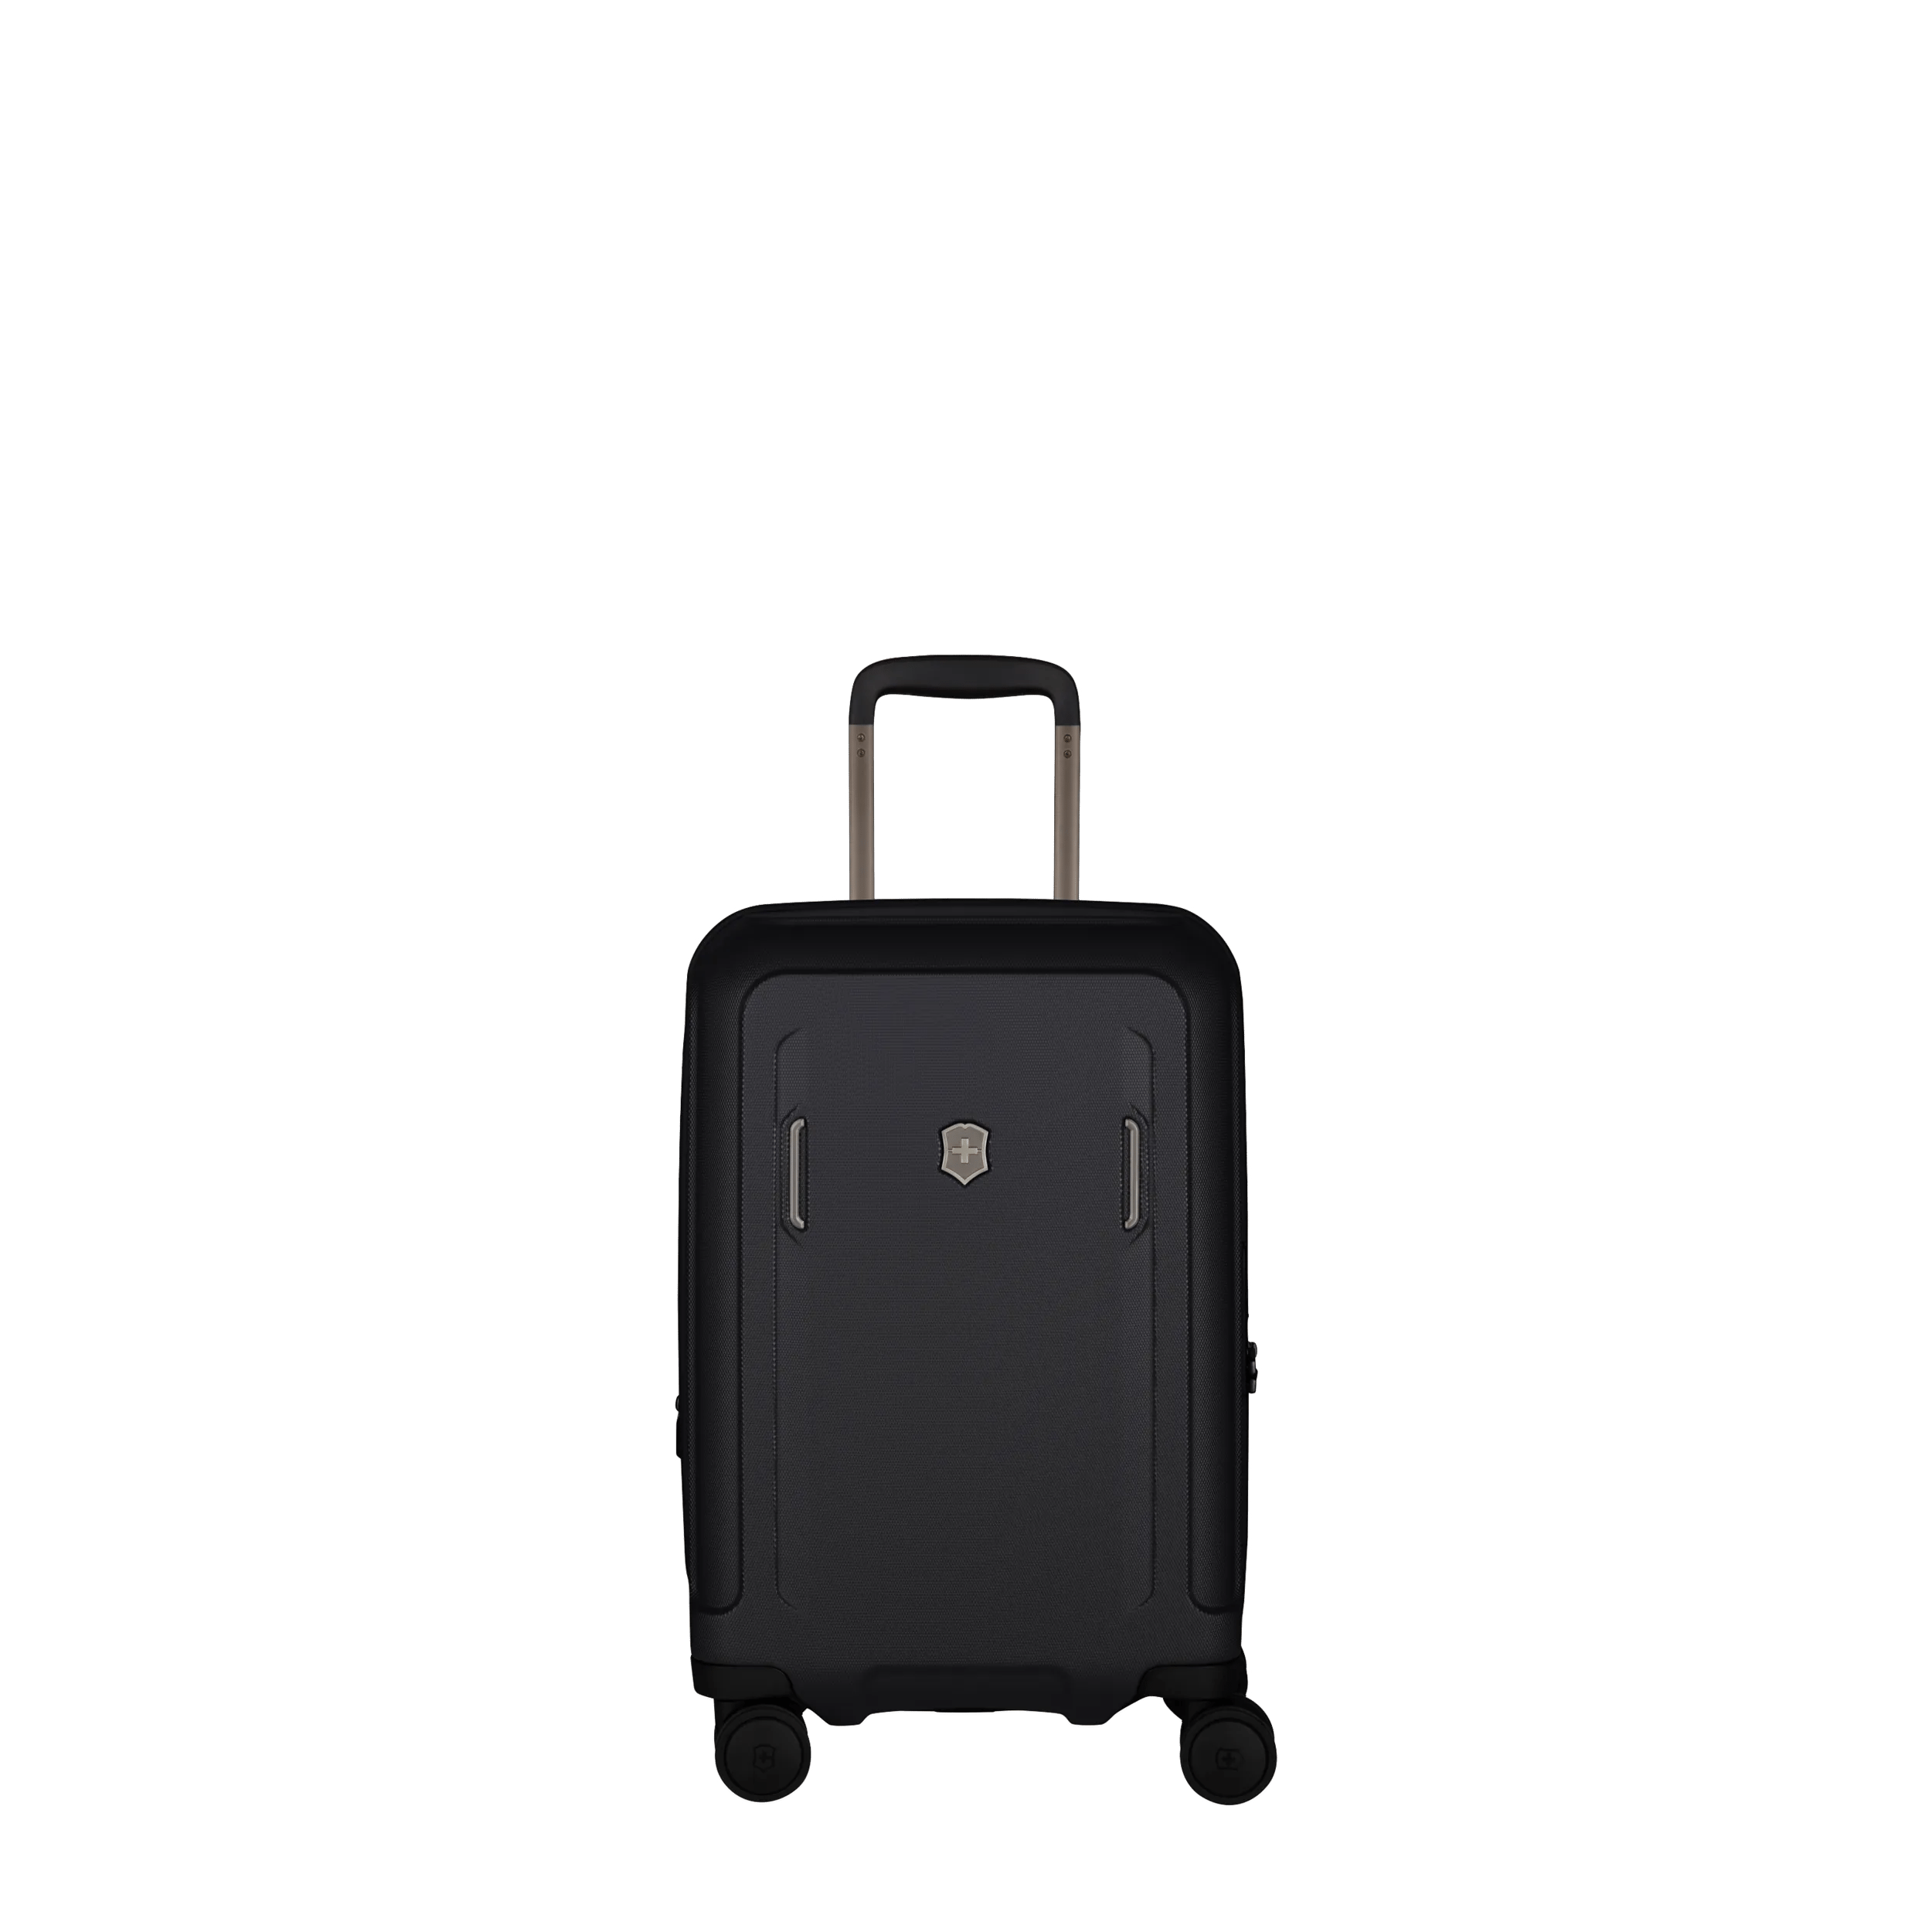 Werks Traveler 6.0 Frequent Flyer Carry-On